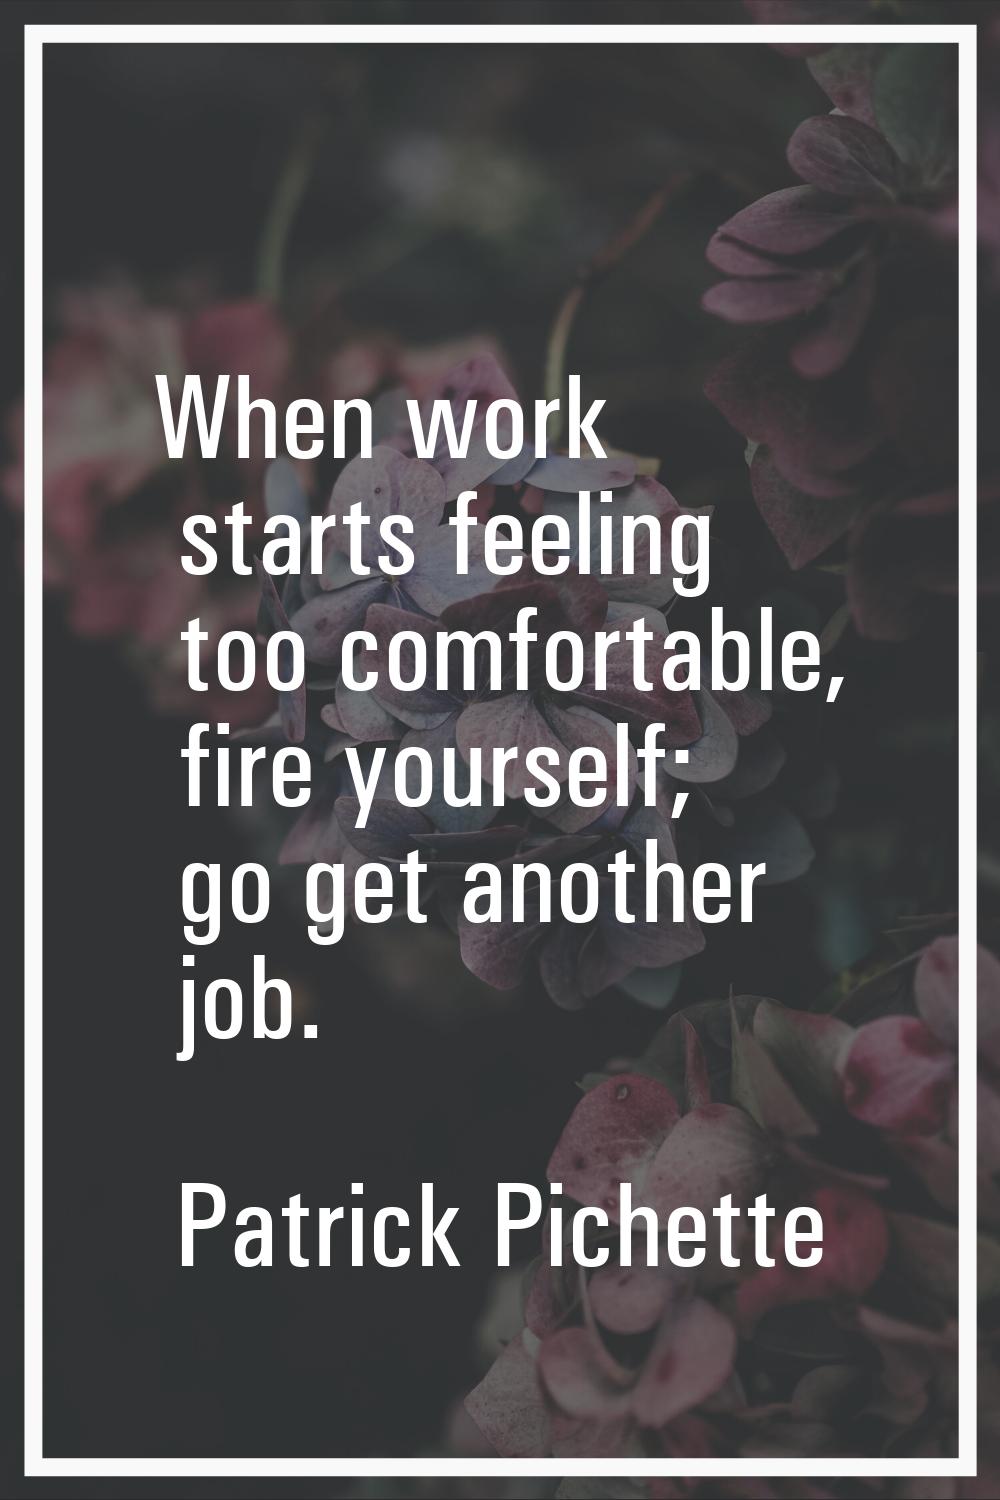 When work starts feeling too comfortable, fire yourself; go get another job.